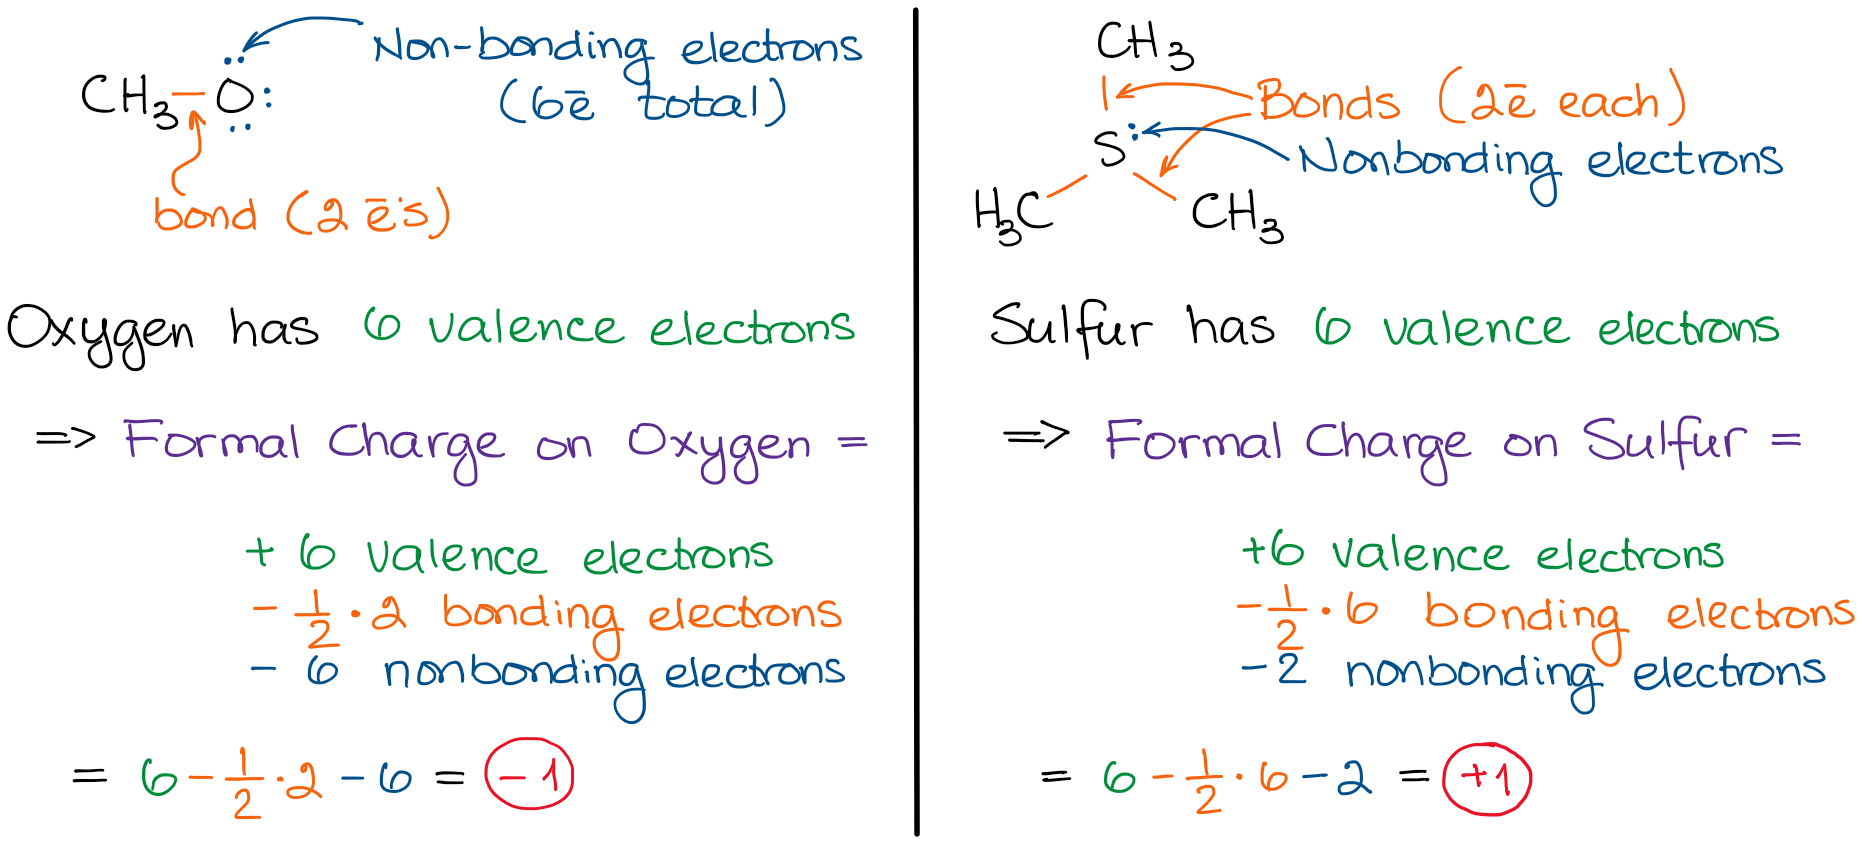 formal charge calculations example